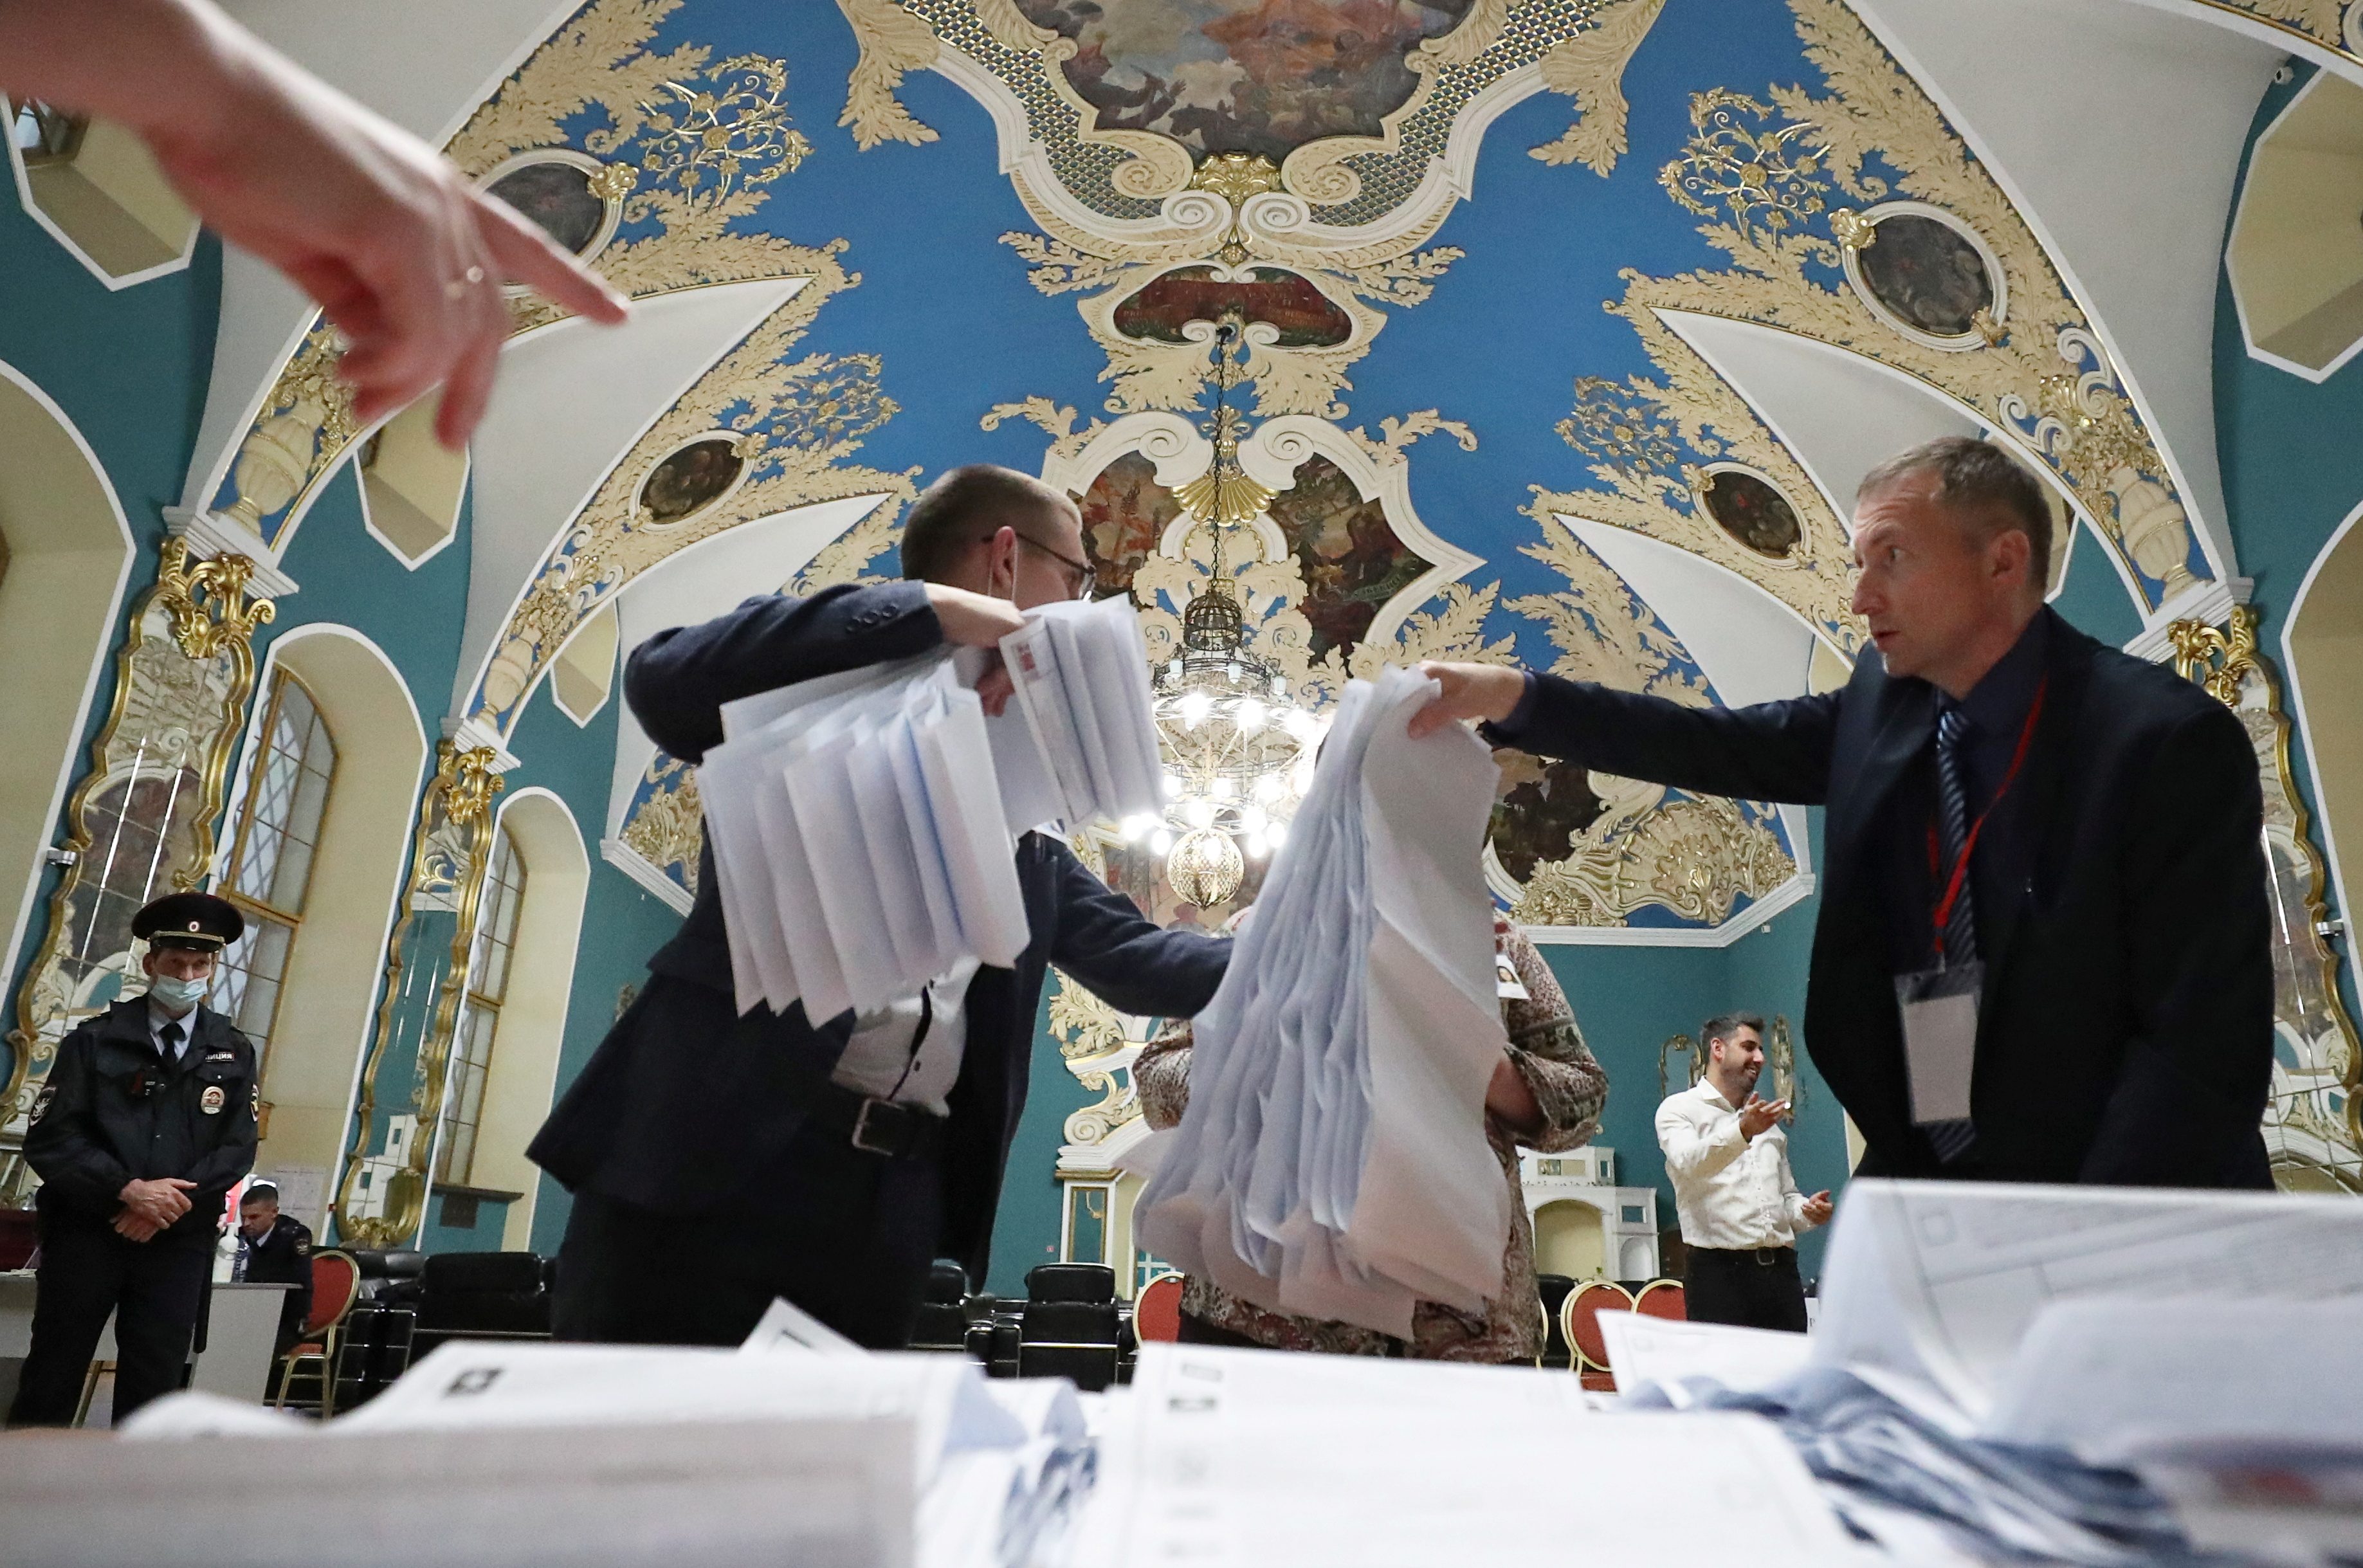 Russian pro-Putin party wins majority after crackdown; foes cry foul